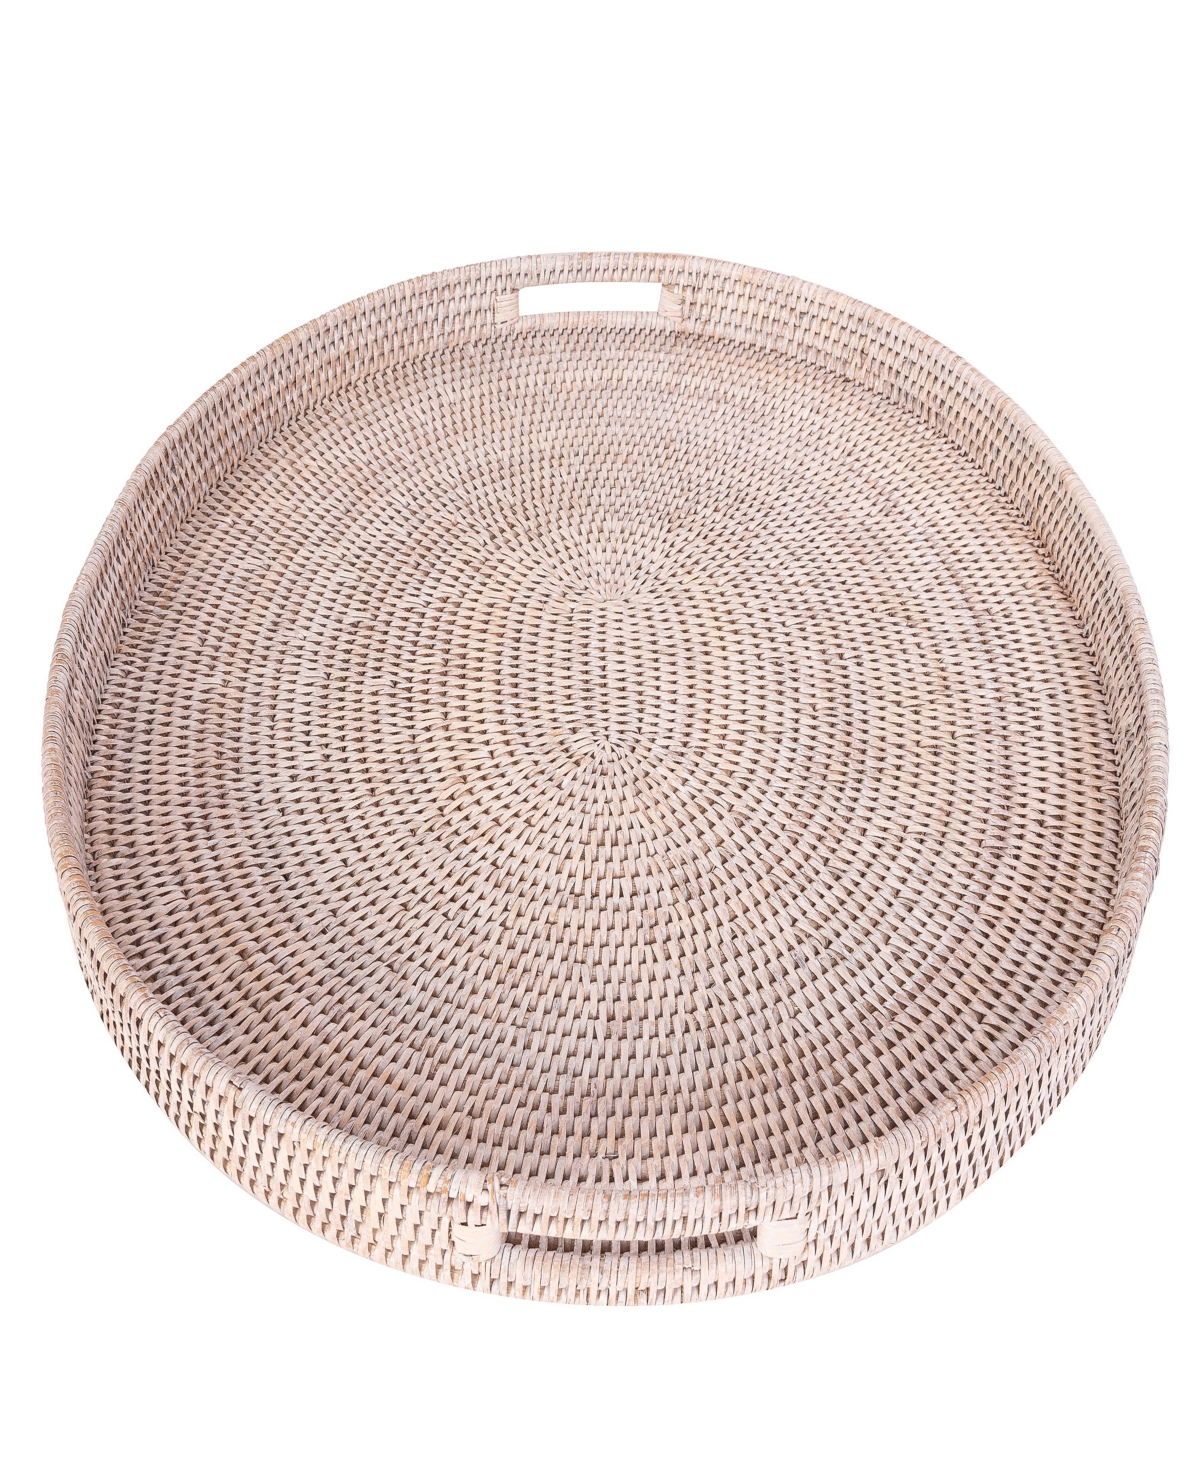 Artifacts Rattan Oval Ottoman Tray with Cutout Handles - White Wash